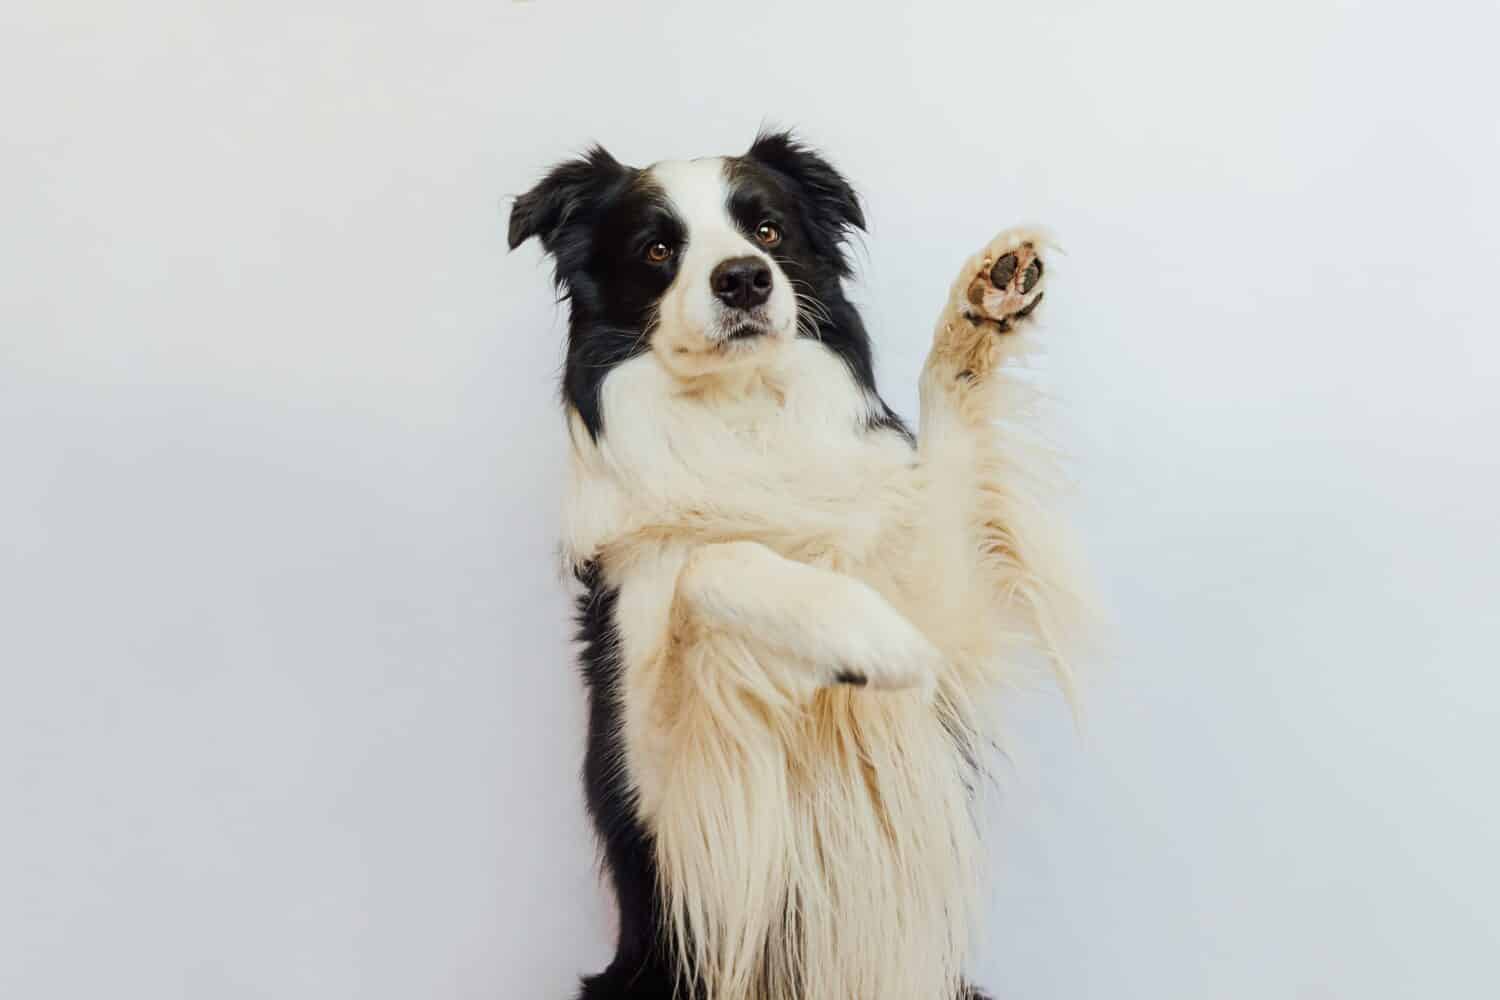 Funny emotional dog. Cute puppy dog border collie with funny face waving paw isolated on white background. Cute pet dog, cute pose. Dog raise paw up. Pet animal life concept